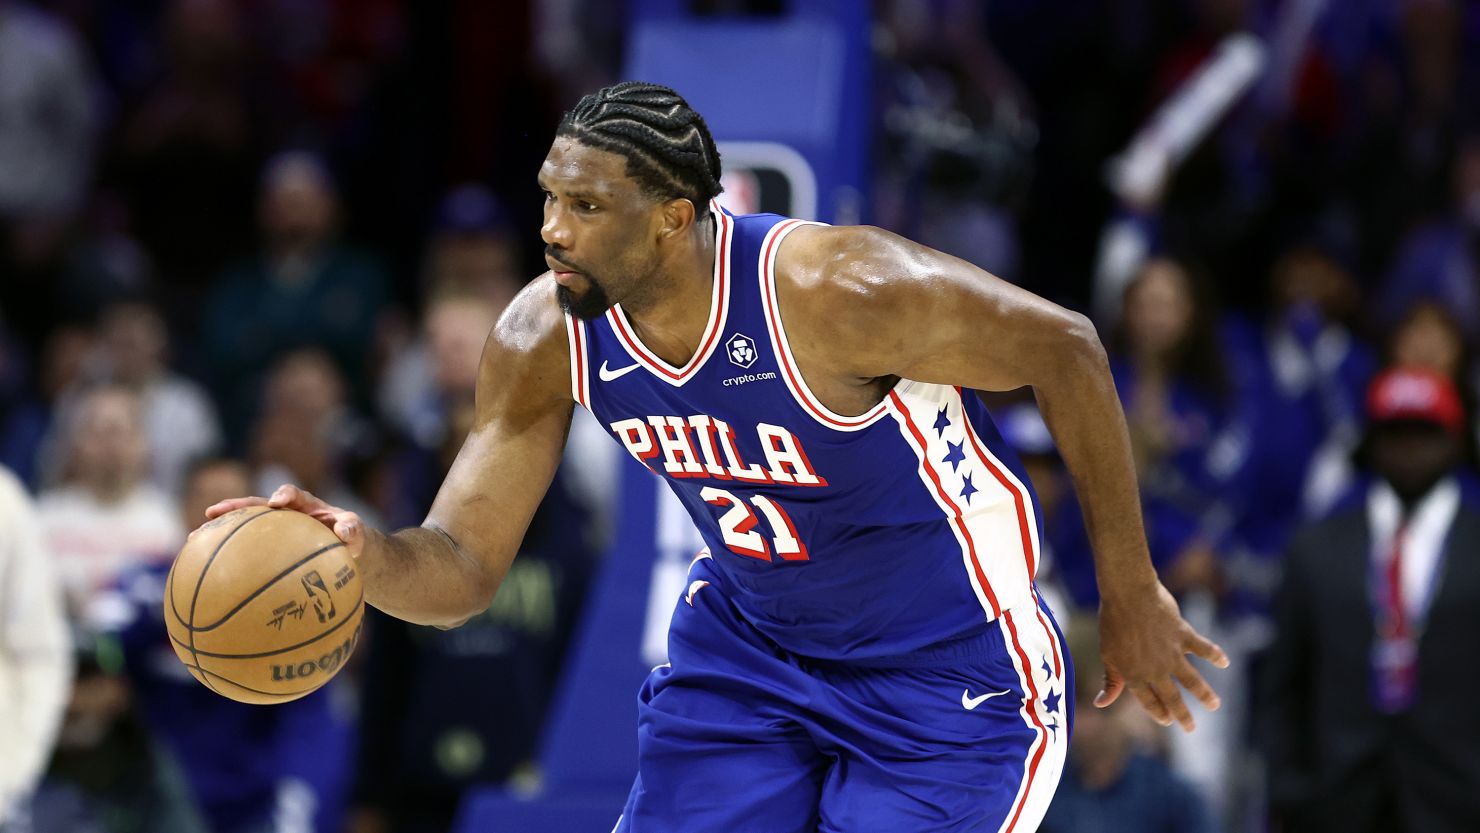 Embiid Blazes Back: 83 Points in 3 Games Leads Sixers Charge